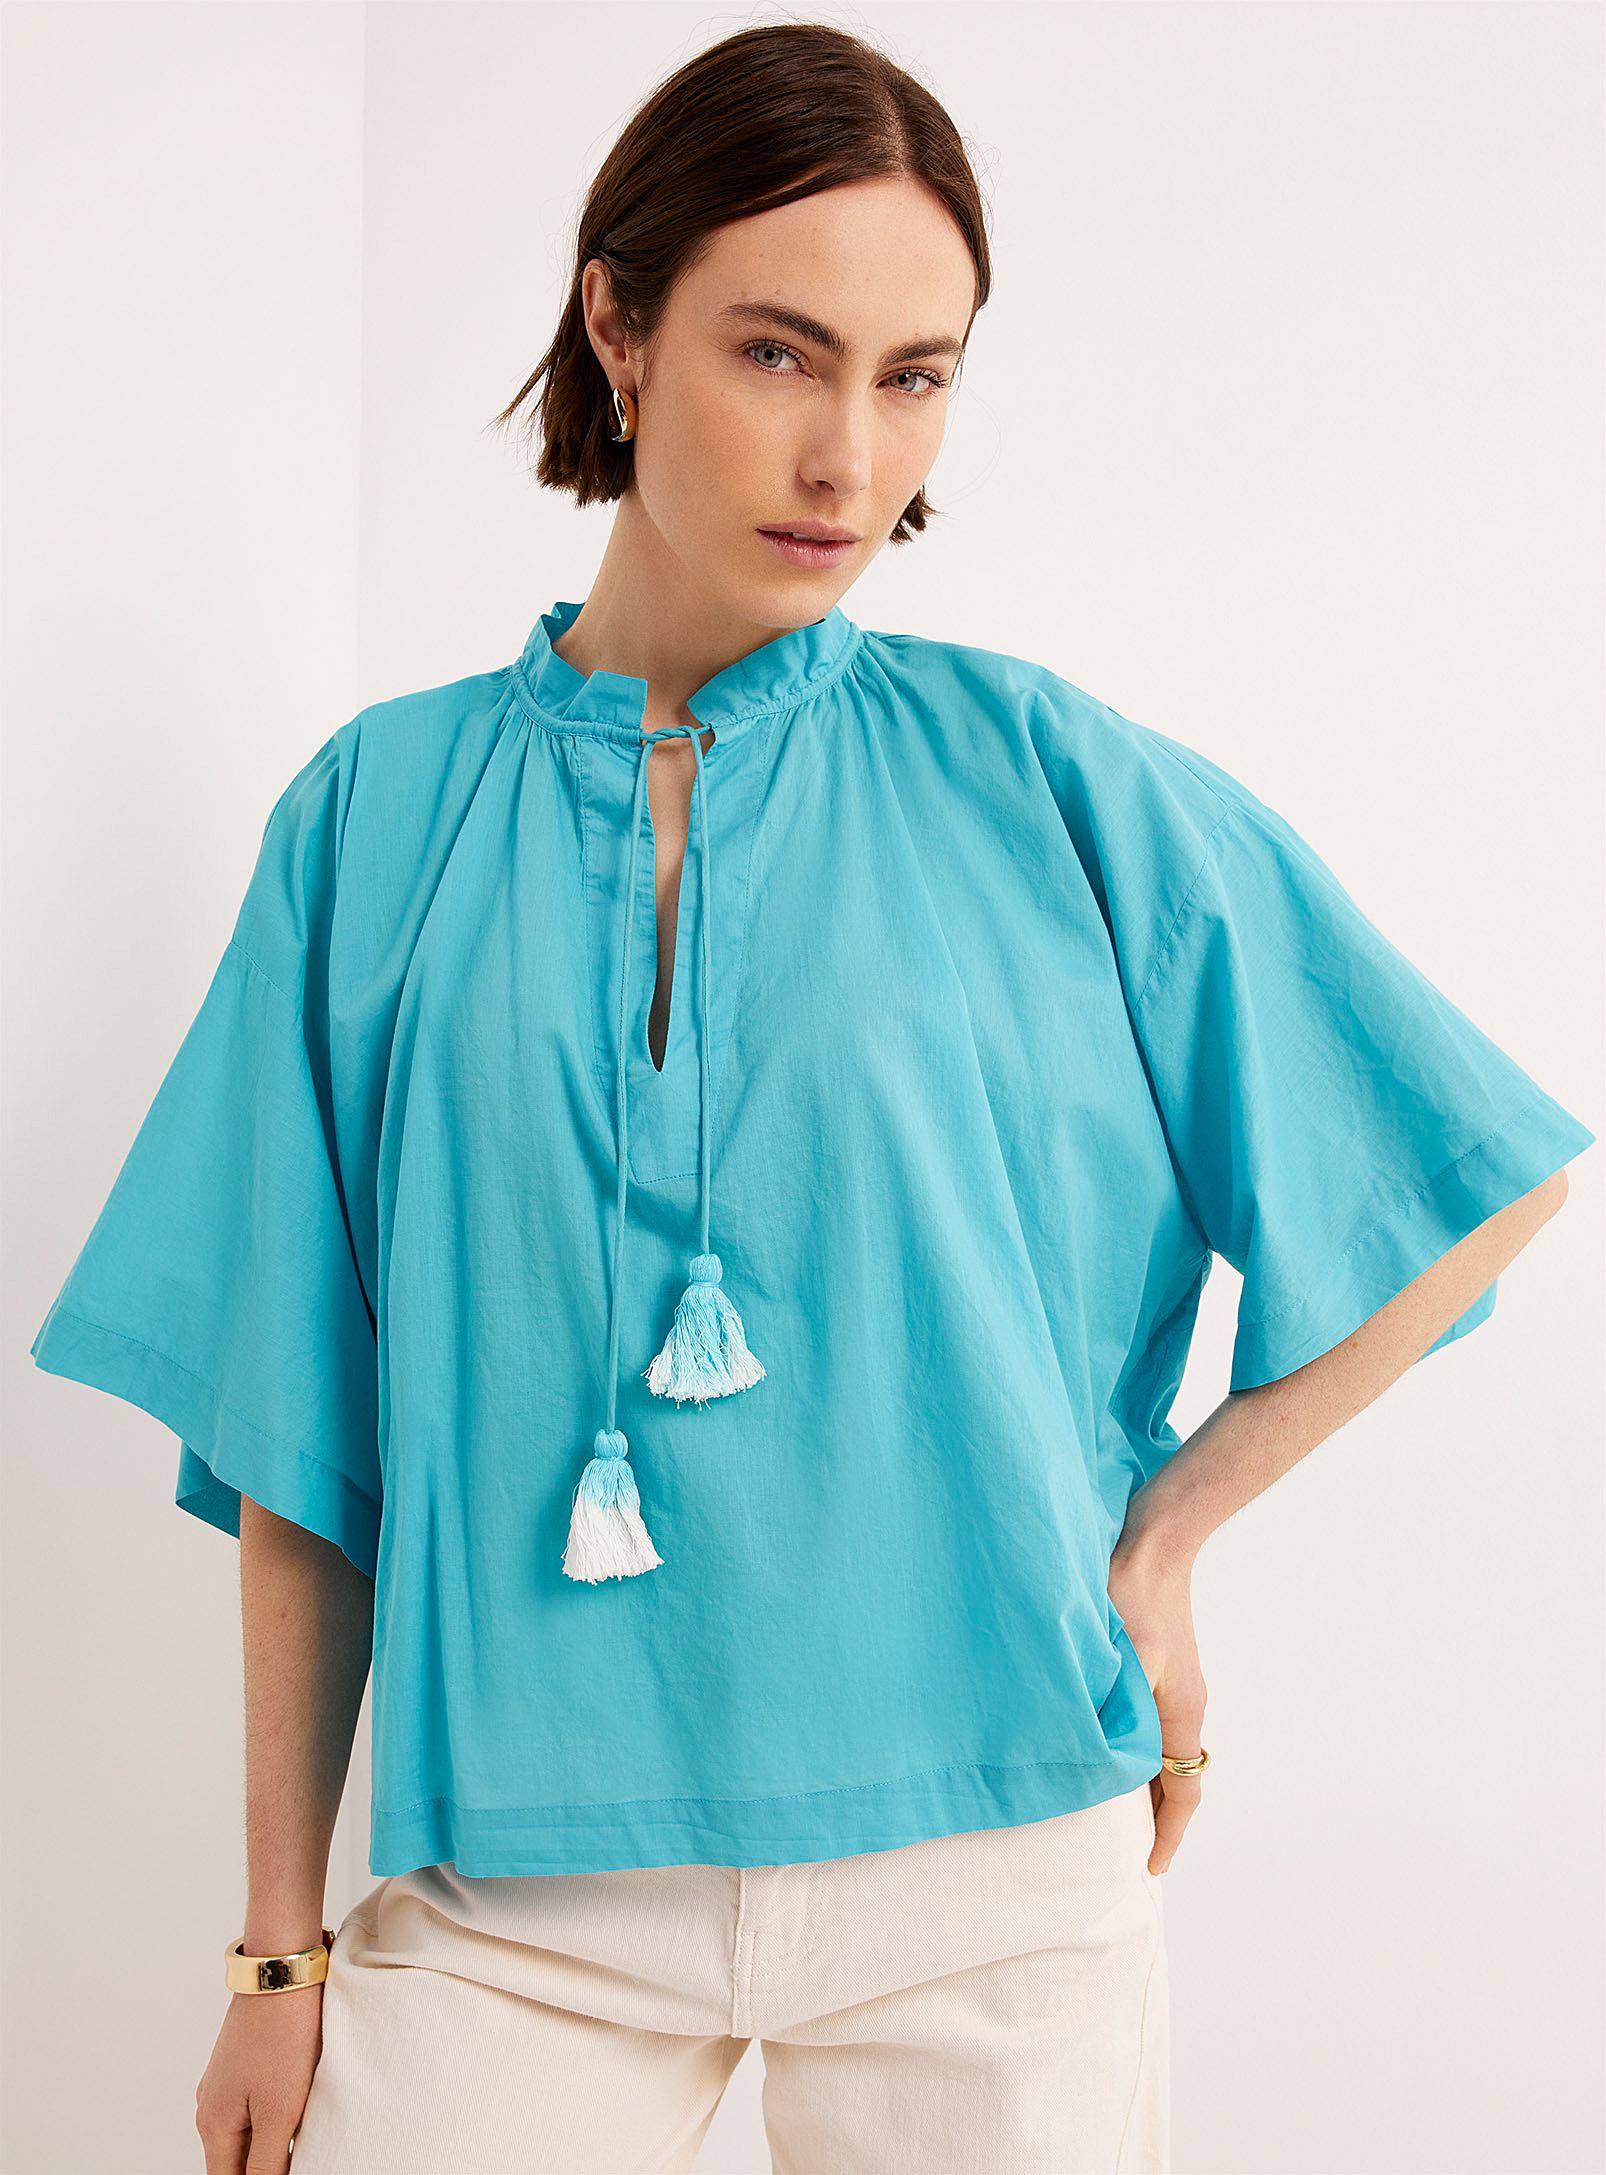 Vanessa Bruno Tyliam Tasseled Turquoise Cotton Blouse In Teal